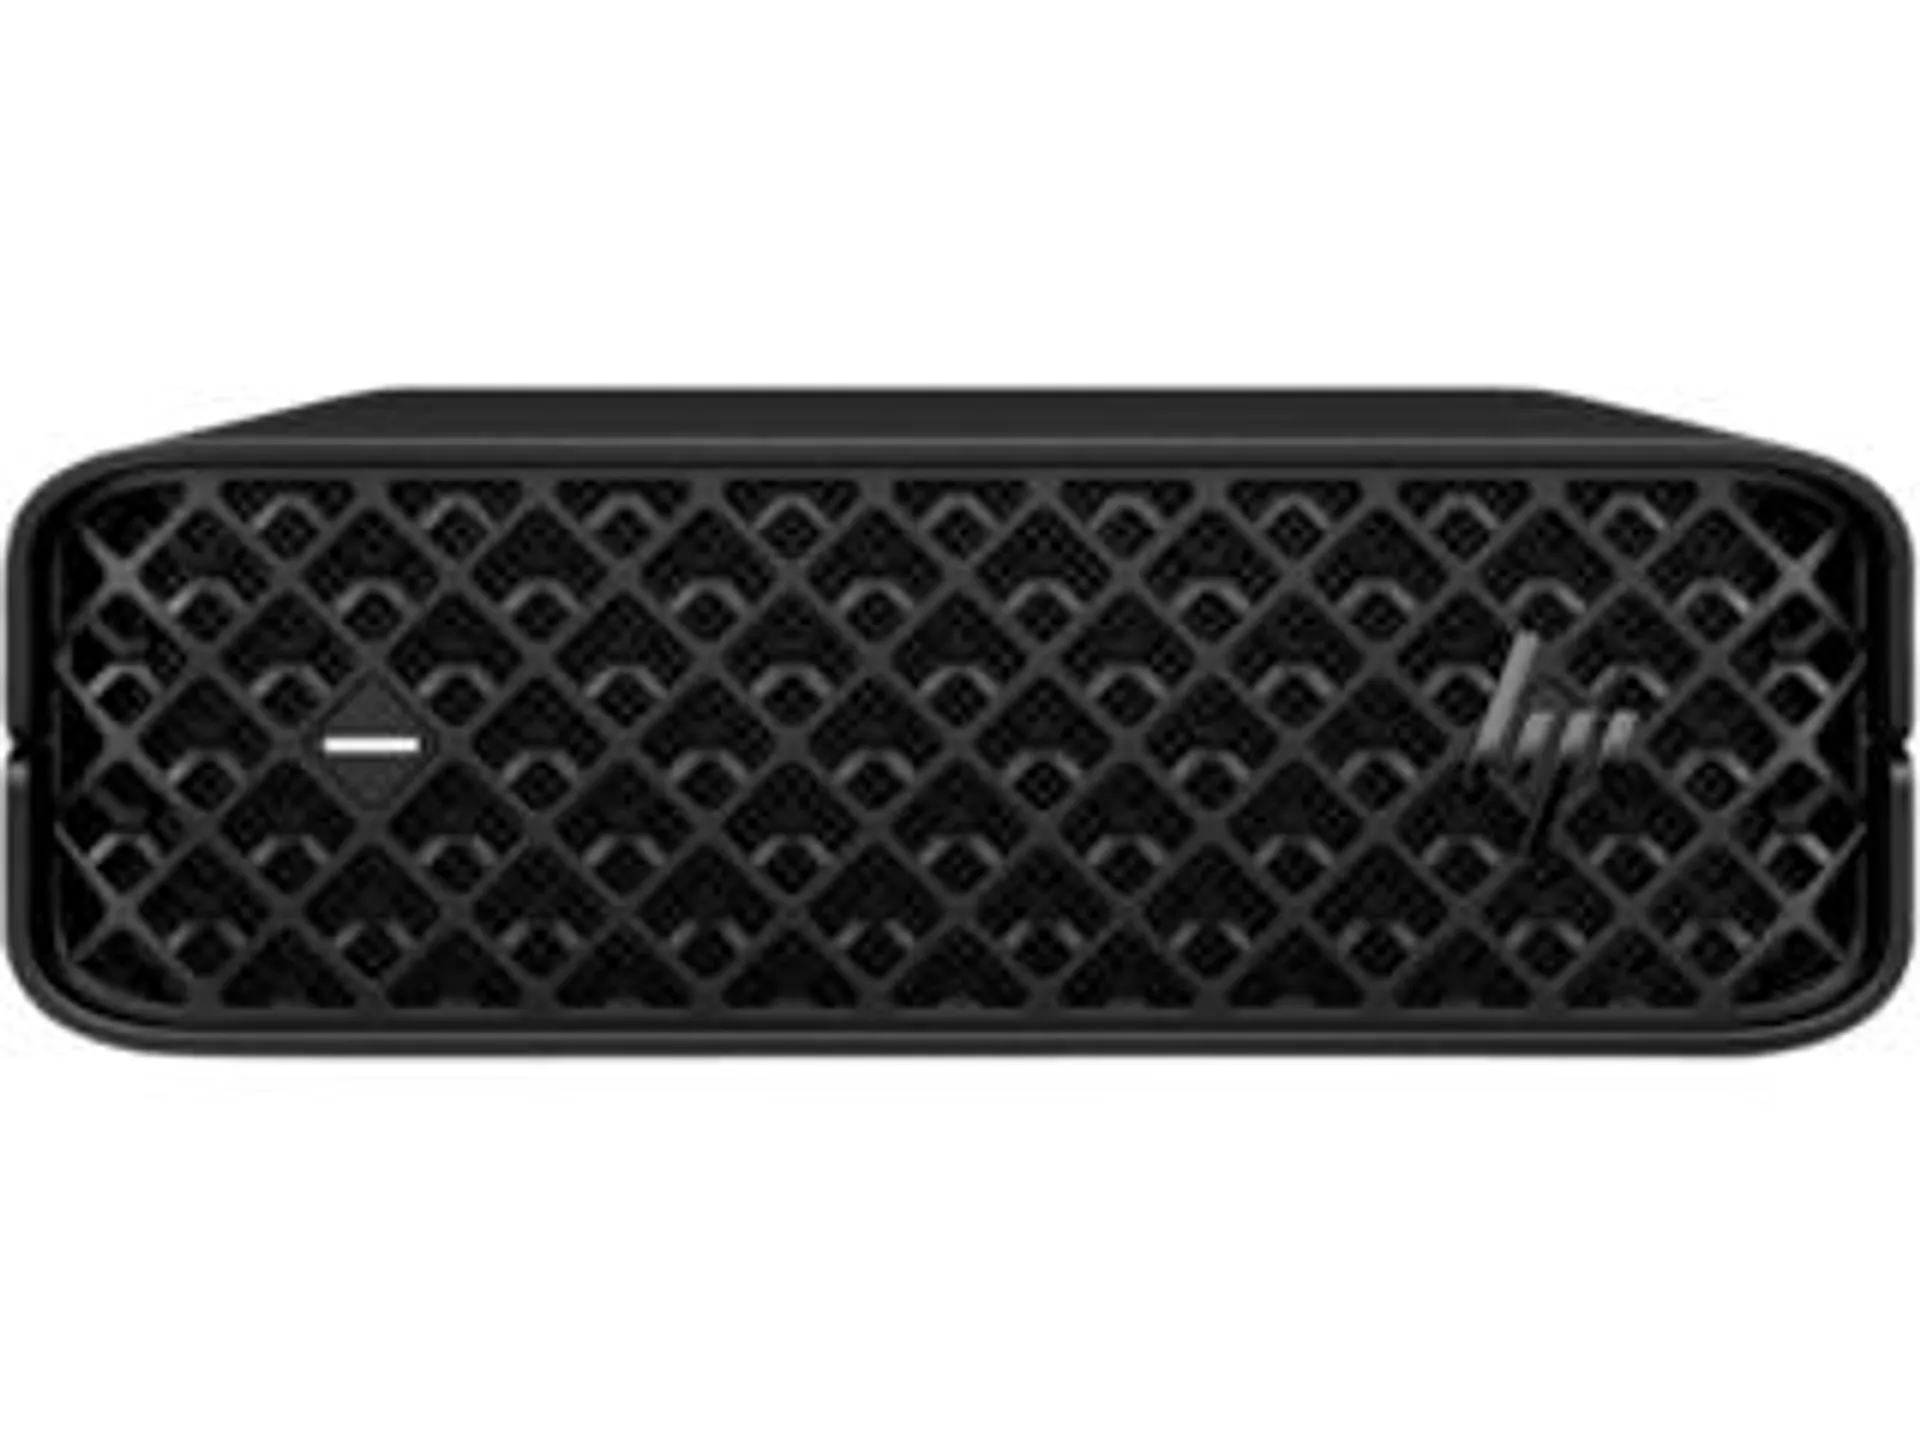 HP Z2 Mini G9 Workstation Wolf Pro Security Edition